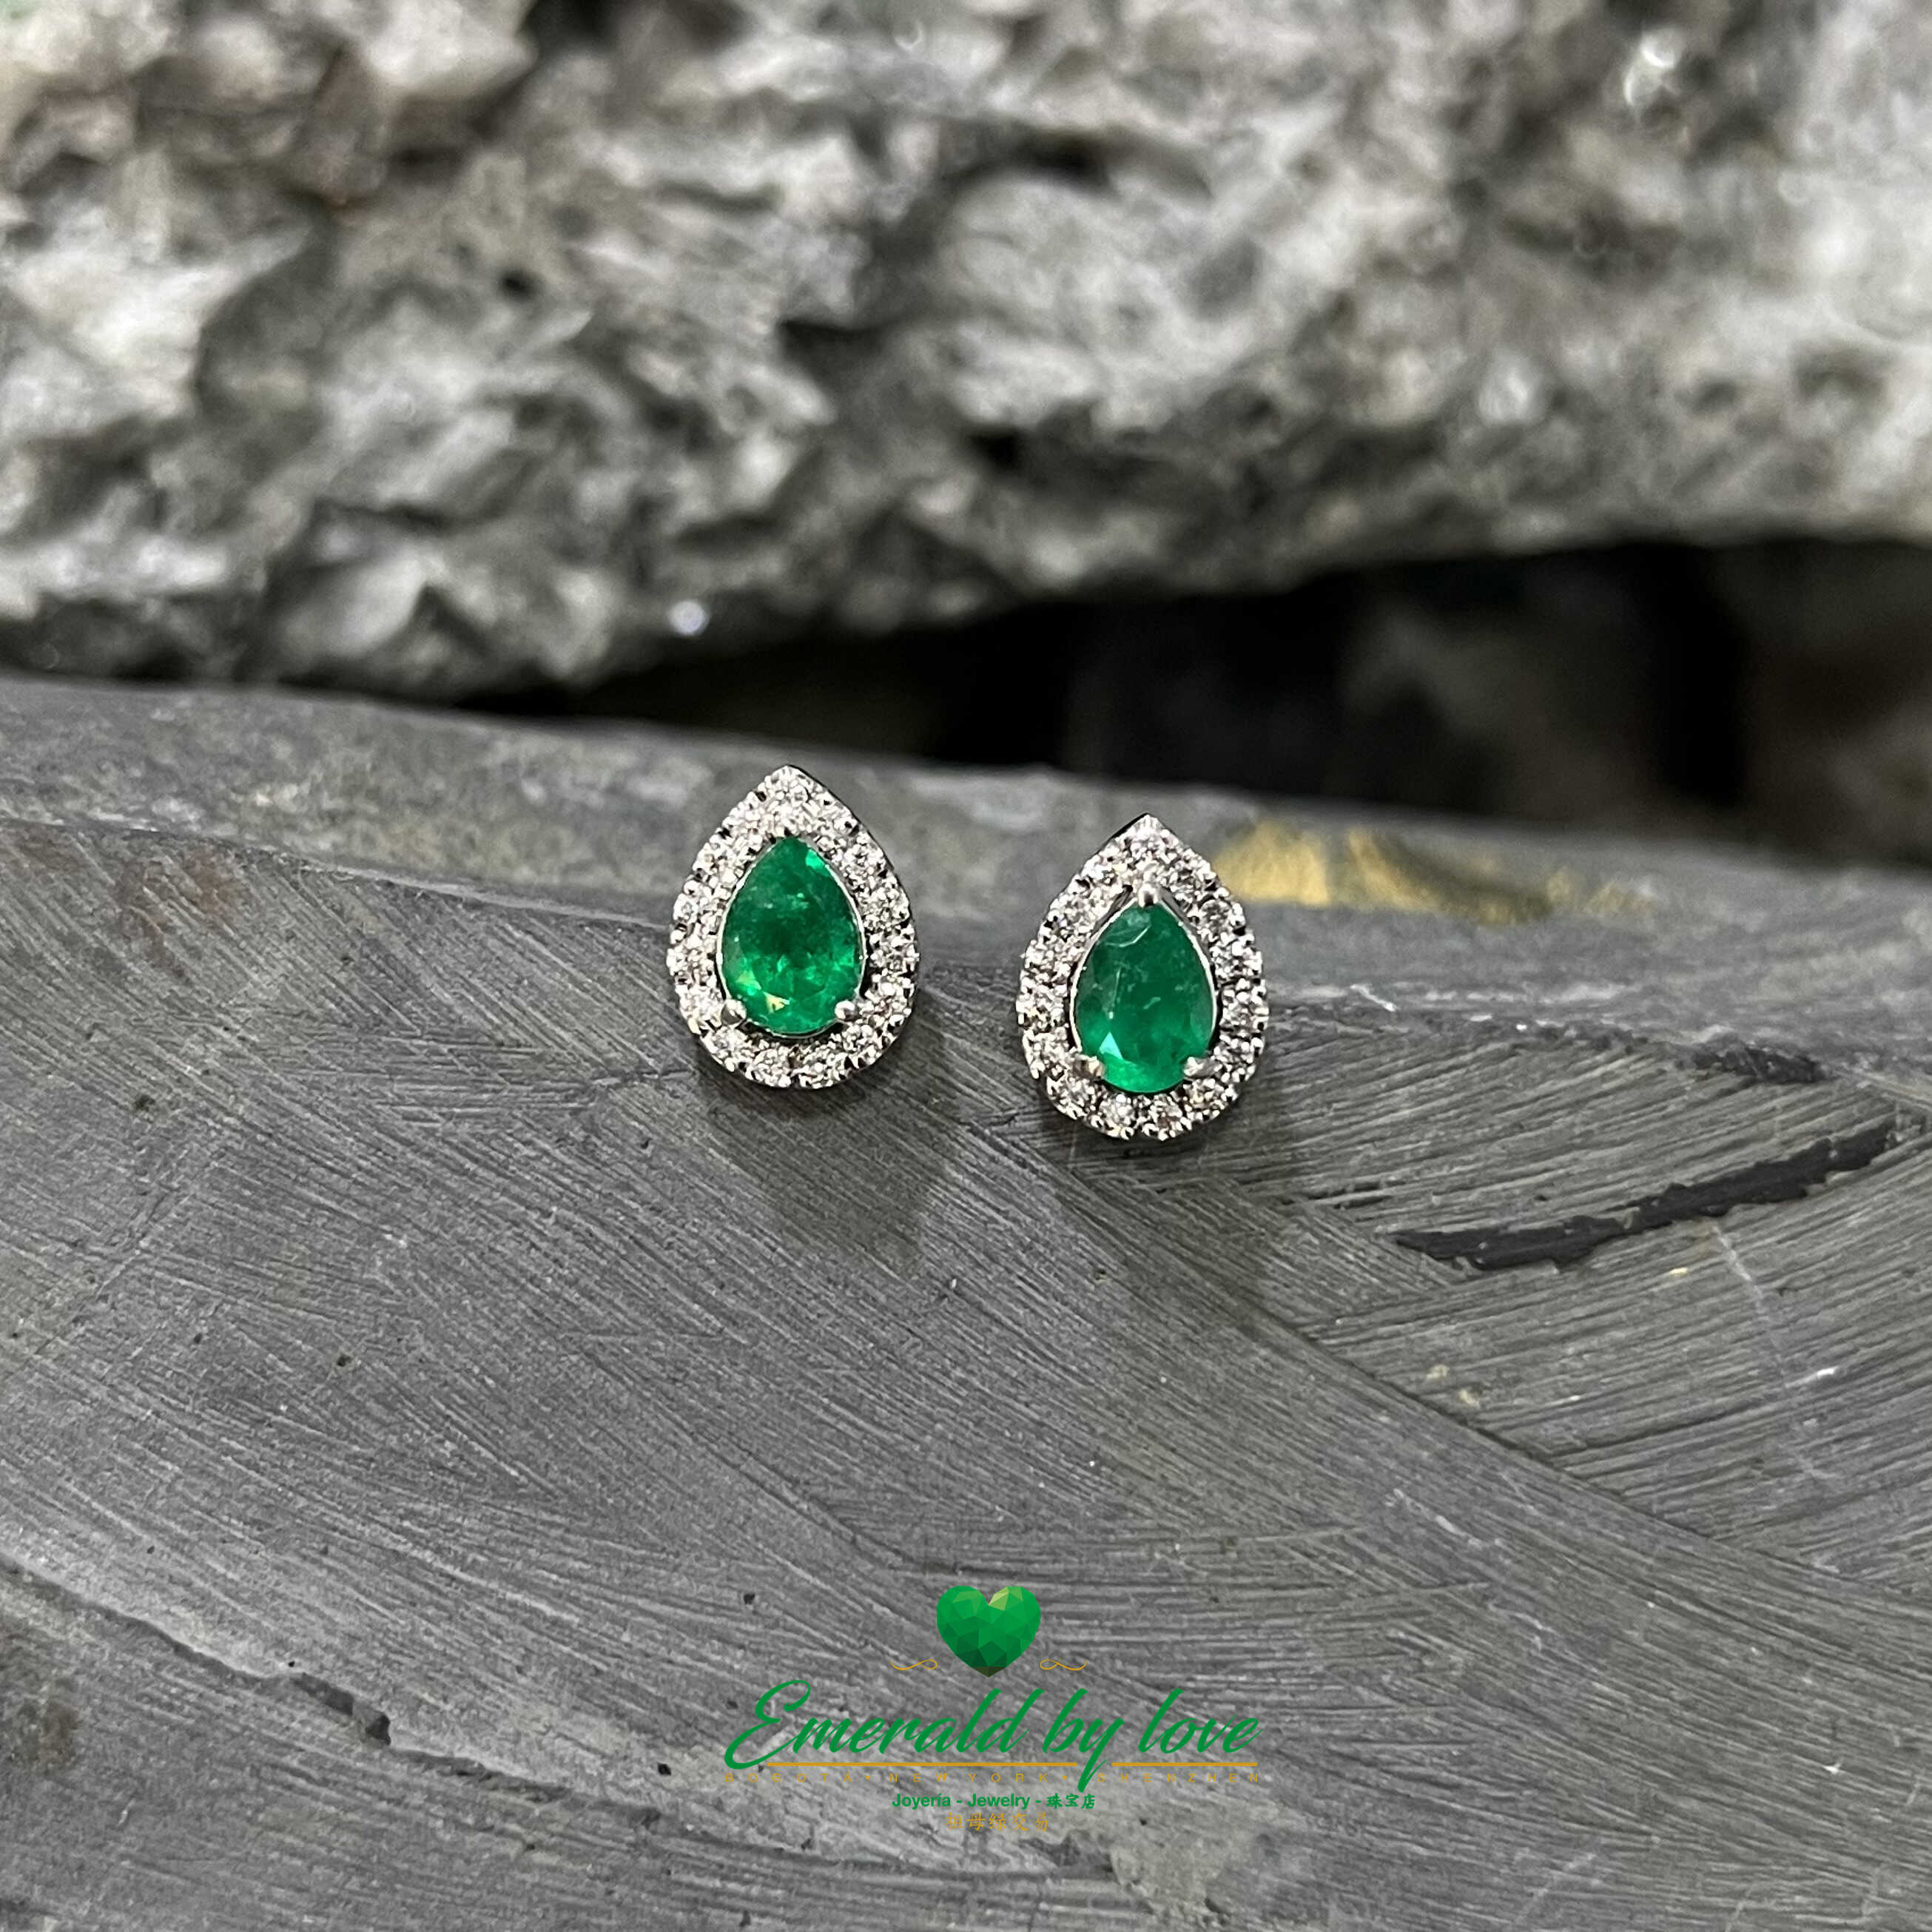 Intriguing Marquise White Gold Earrings with 1.2 Ct Teardrop Emeralds and 0.3 Ct Diamonds